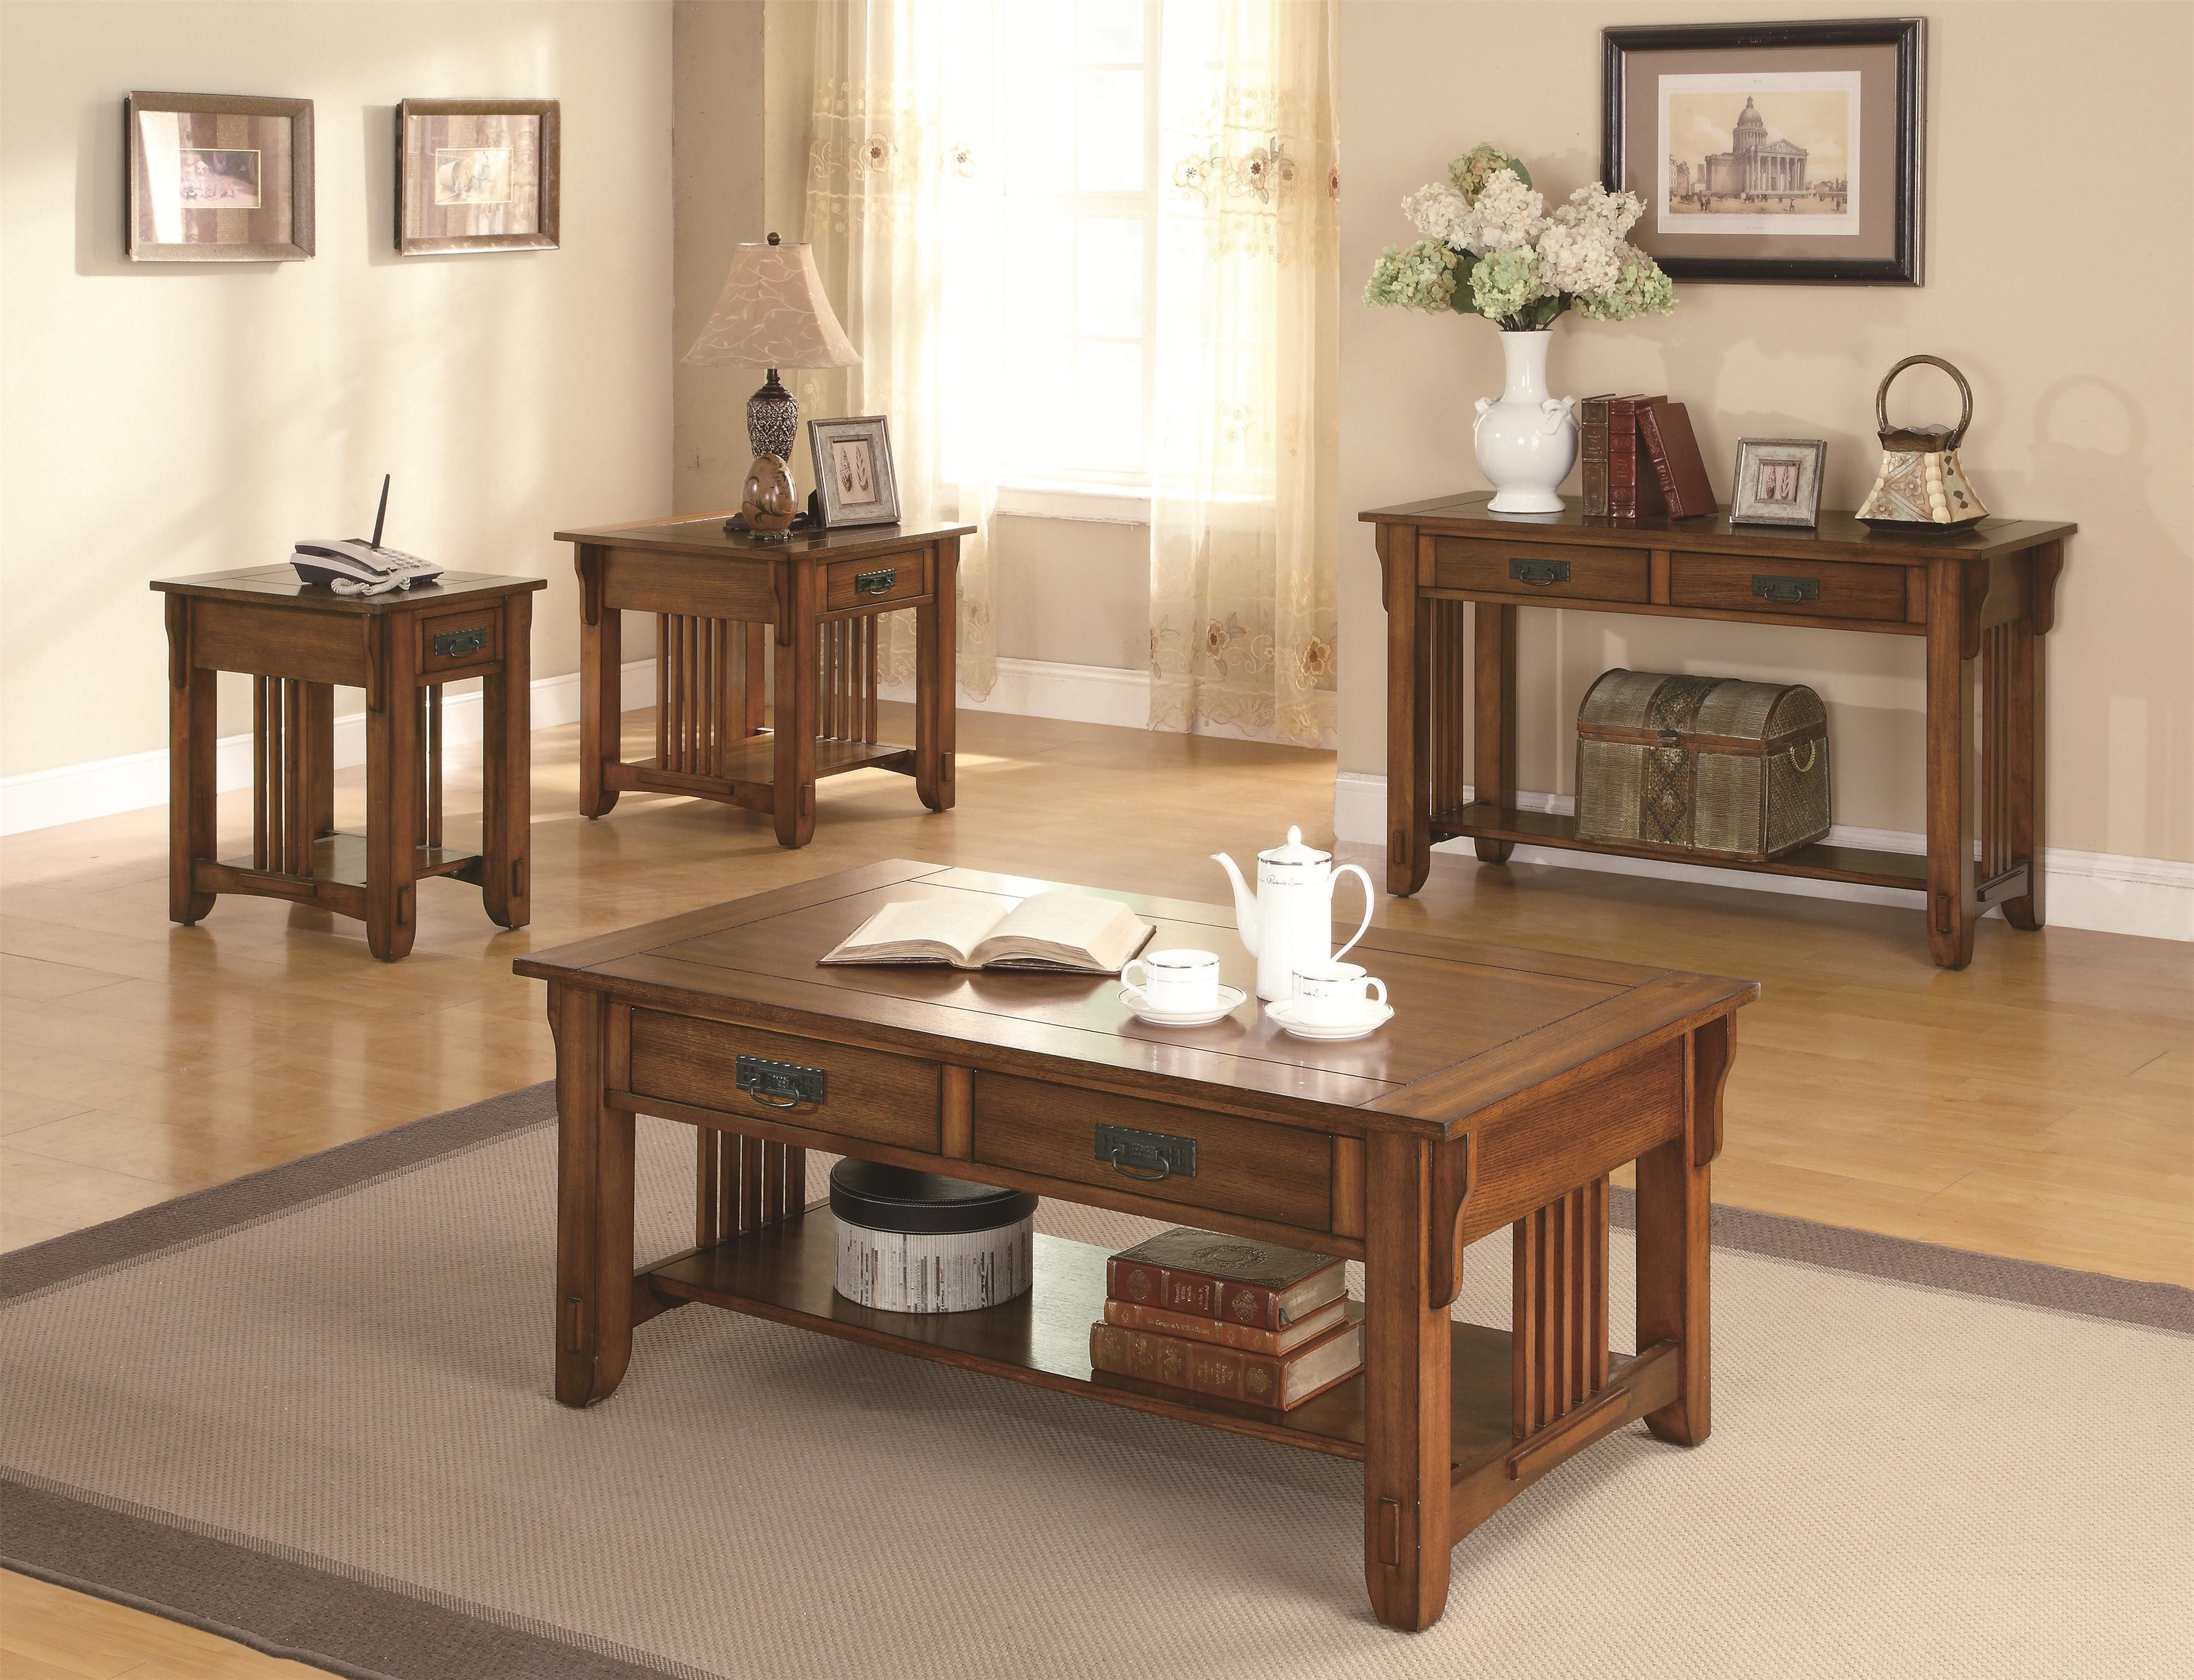 Coffee Tables – Traditional Coffee Table Co 702008 | Pertaining To Traditional Coffee Tables (View 23 of 30)